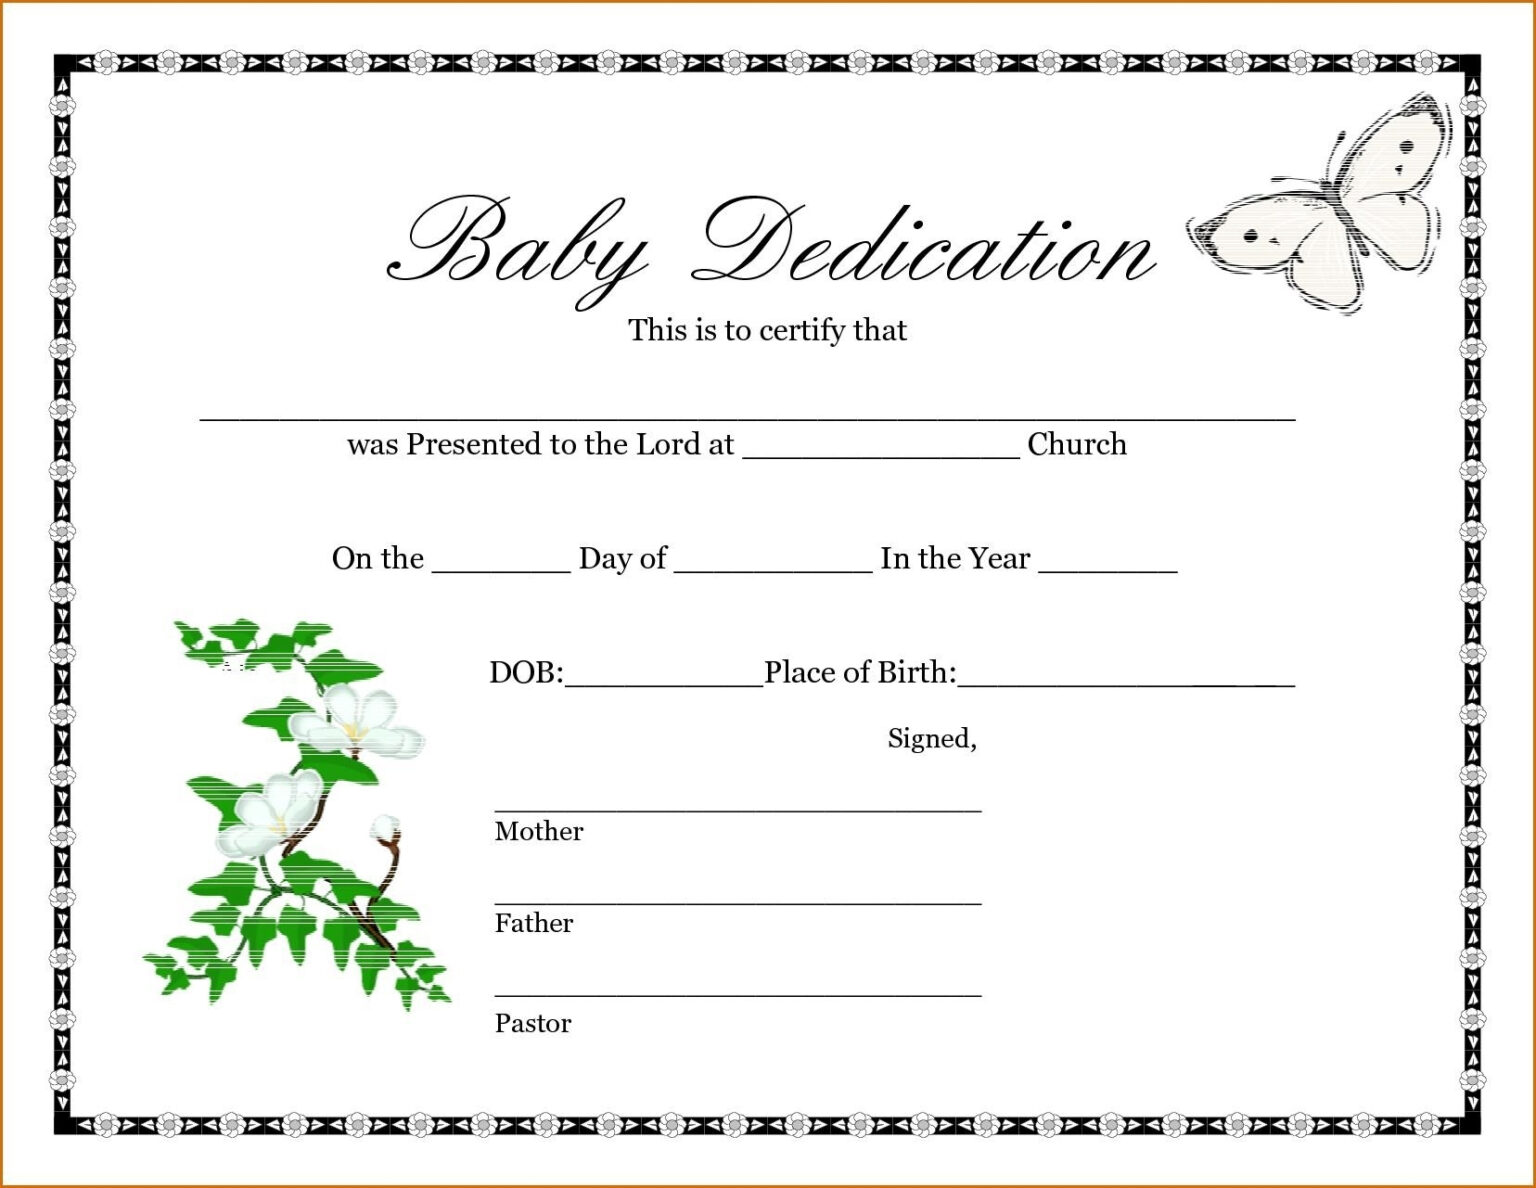 A Birth Certificate Template Safebest xyz in Build A Bear Birth